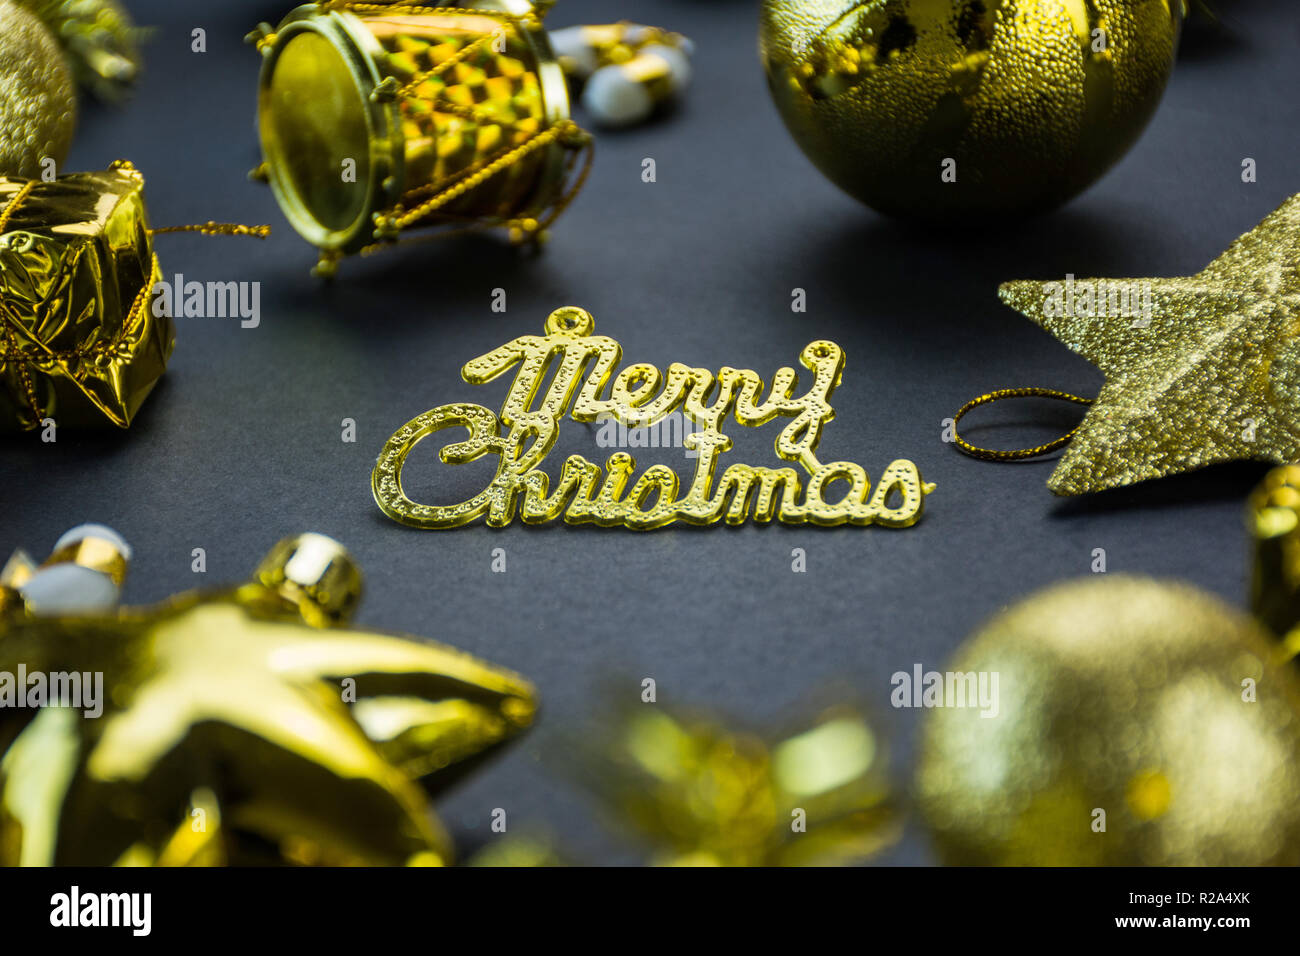 Christmas Decoration Designs Items with Black Blackground, Gift Box Gold And Red Color Ball Stock Photo